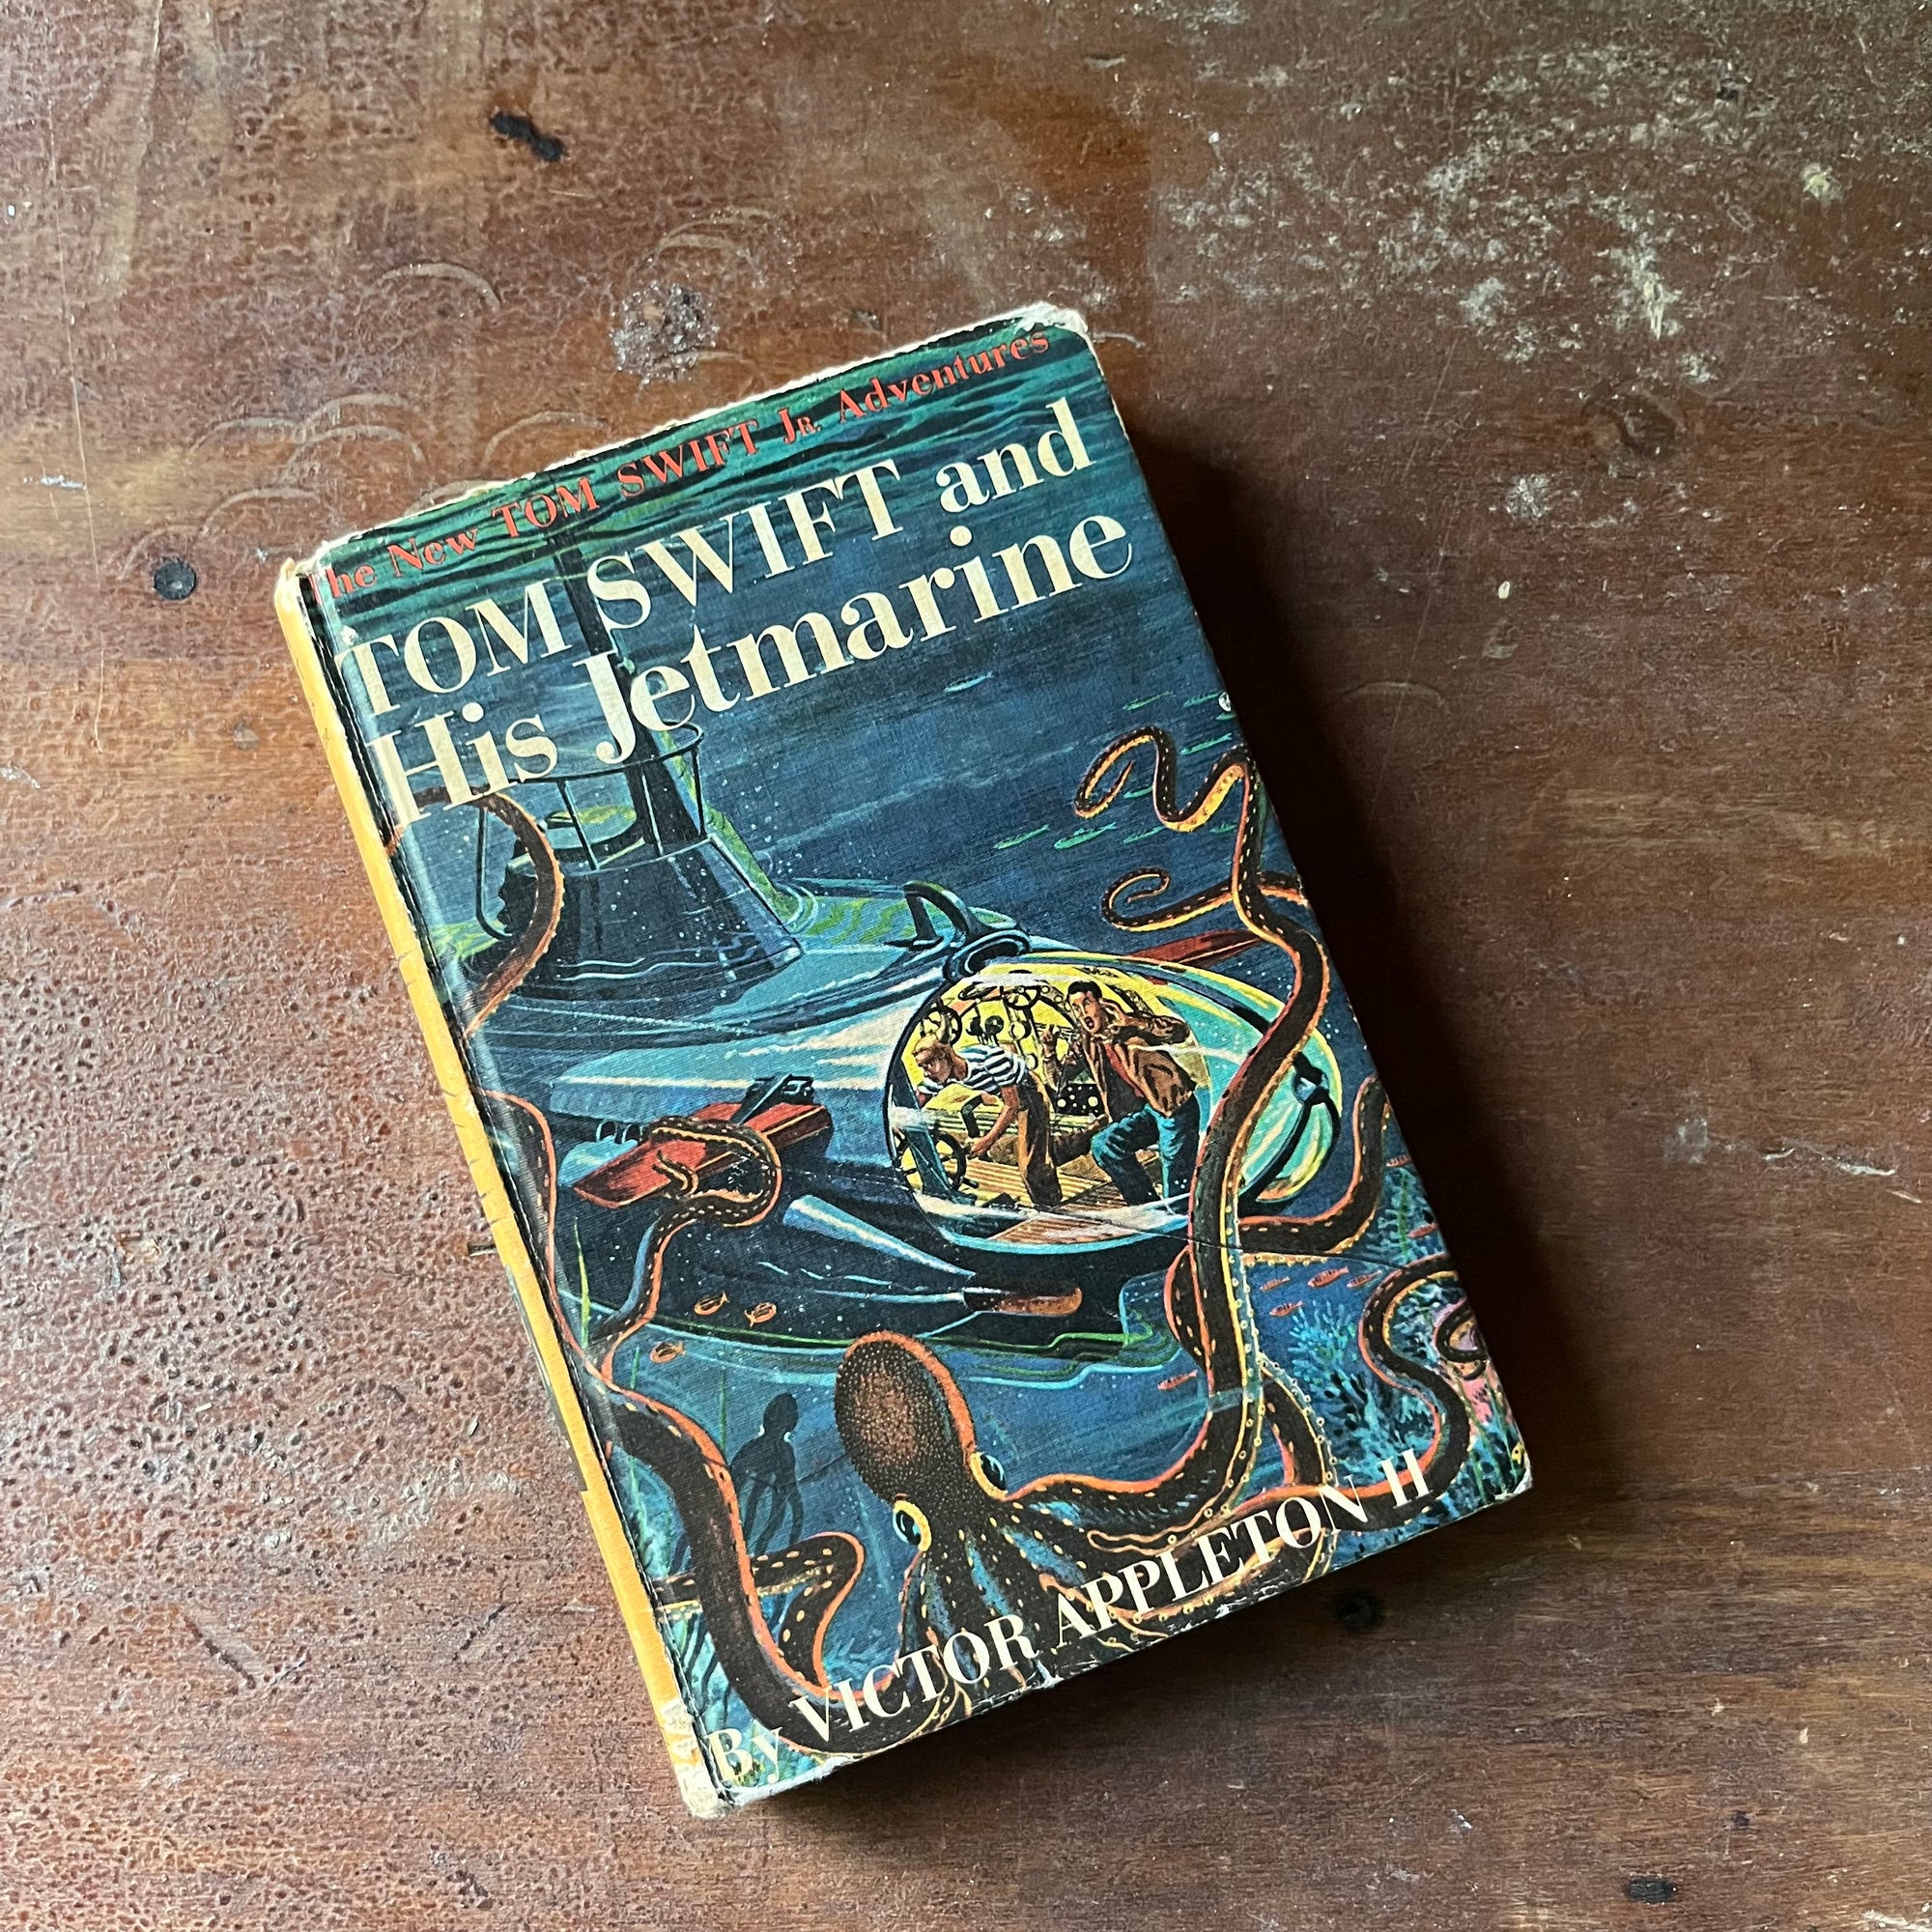 vintage children's chapter book, vintage children's adventure book, The New Tom Swift Jr. Adventure Book - Tom Swift and His Jetmarine written by Victor Appleton II with illustrations by Graham Kaye - view of the front cover